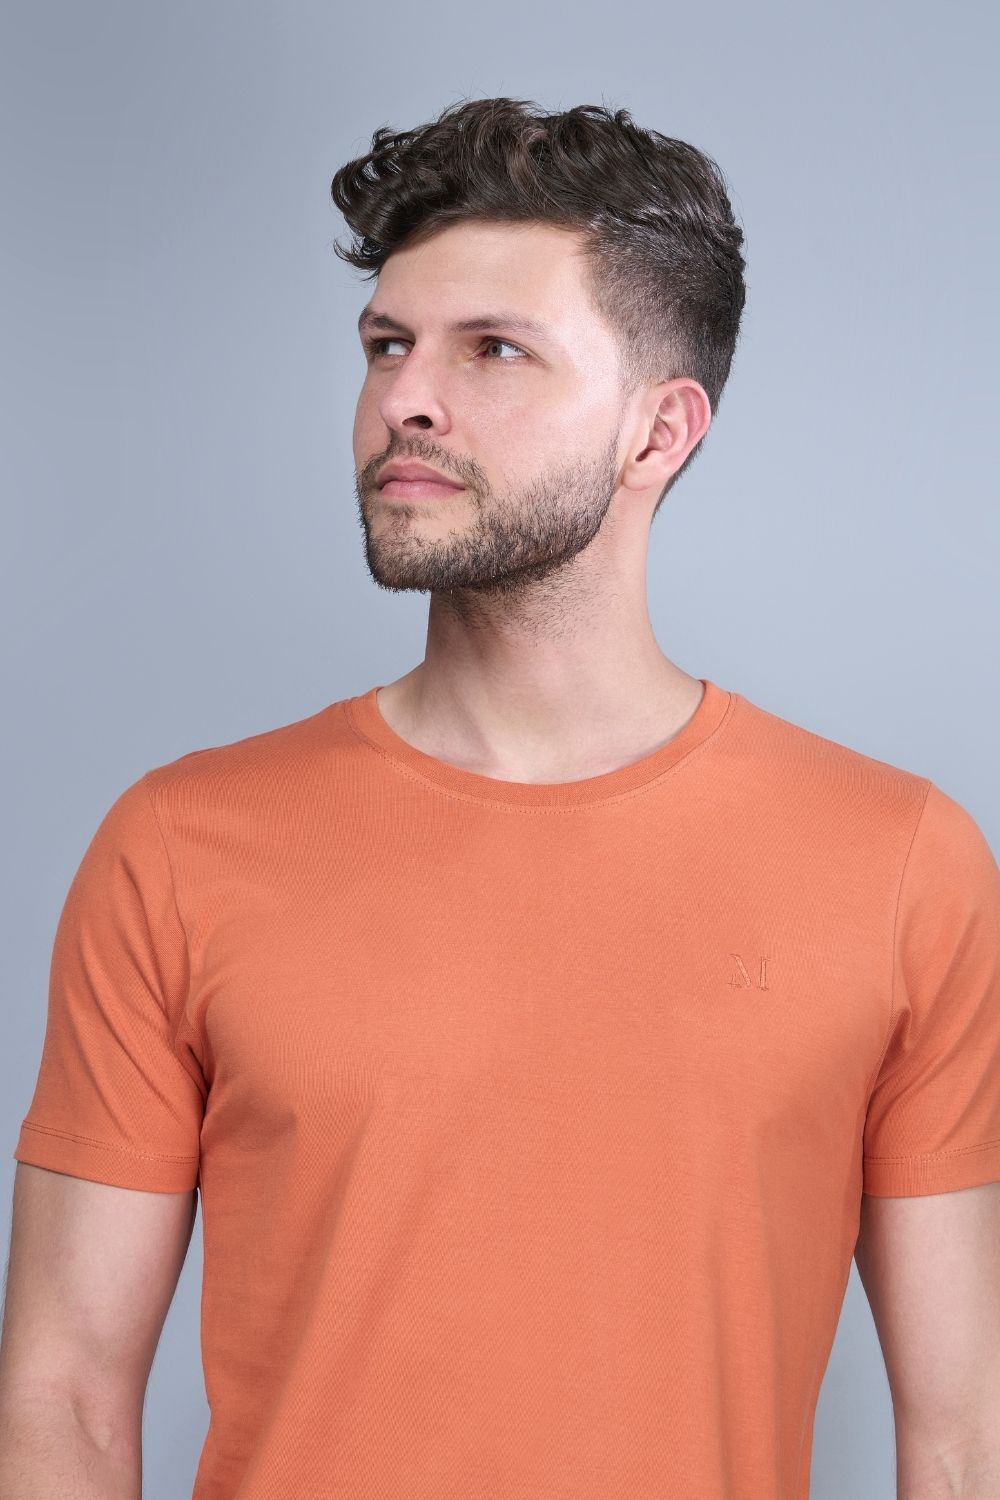 Solid T shirt for men in the color Sand stone  with half sleeves and round neck, close up.